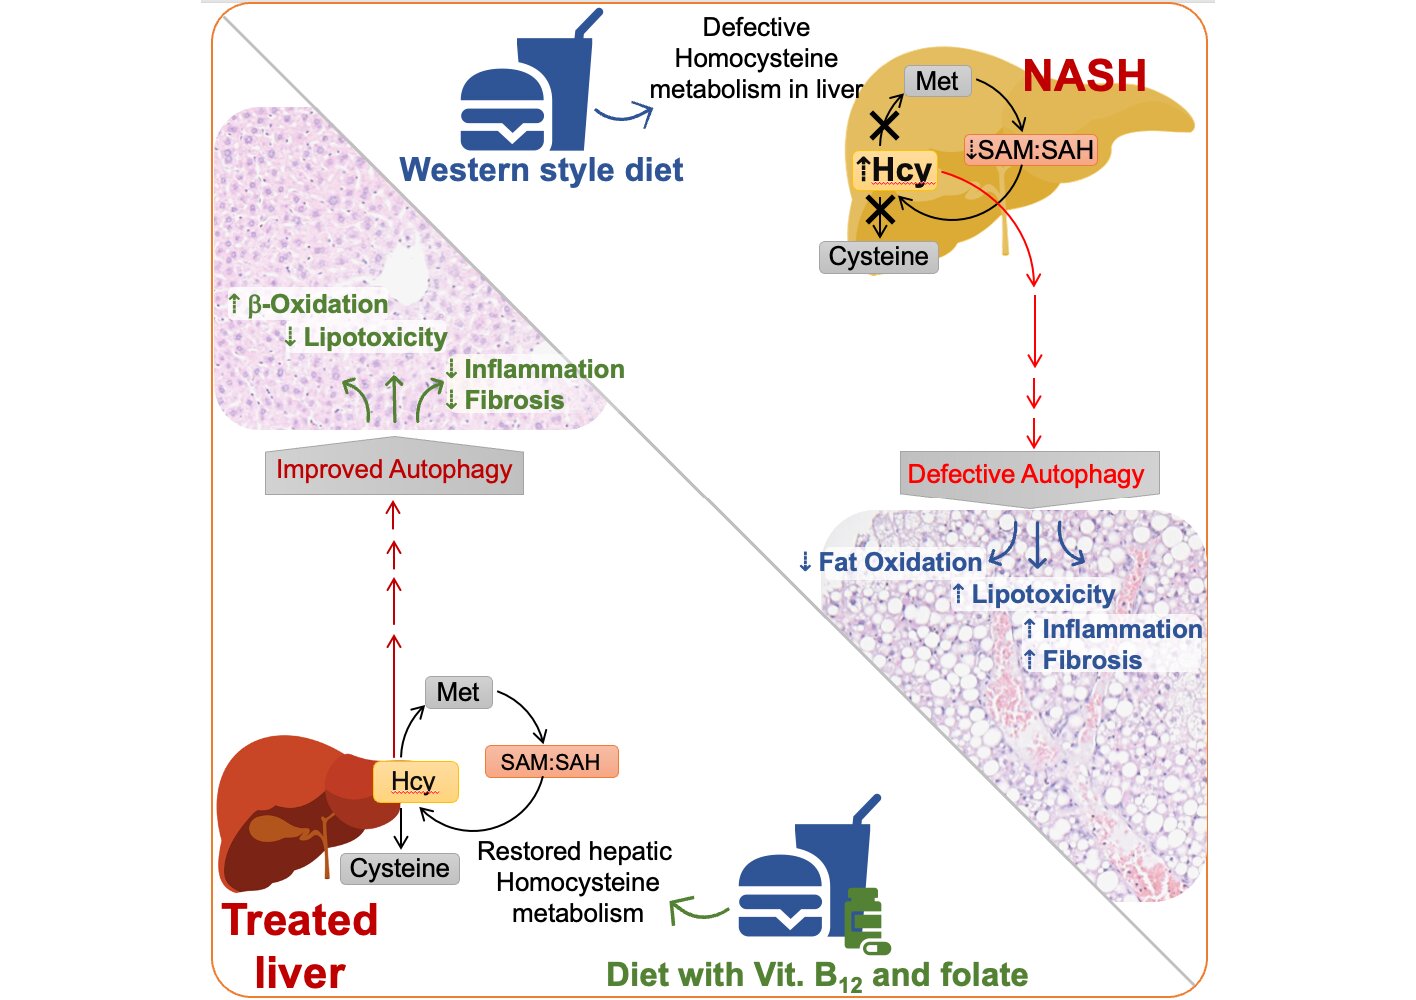 B potentially be used to treat advanced non-alcoholic fatty liver